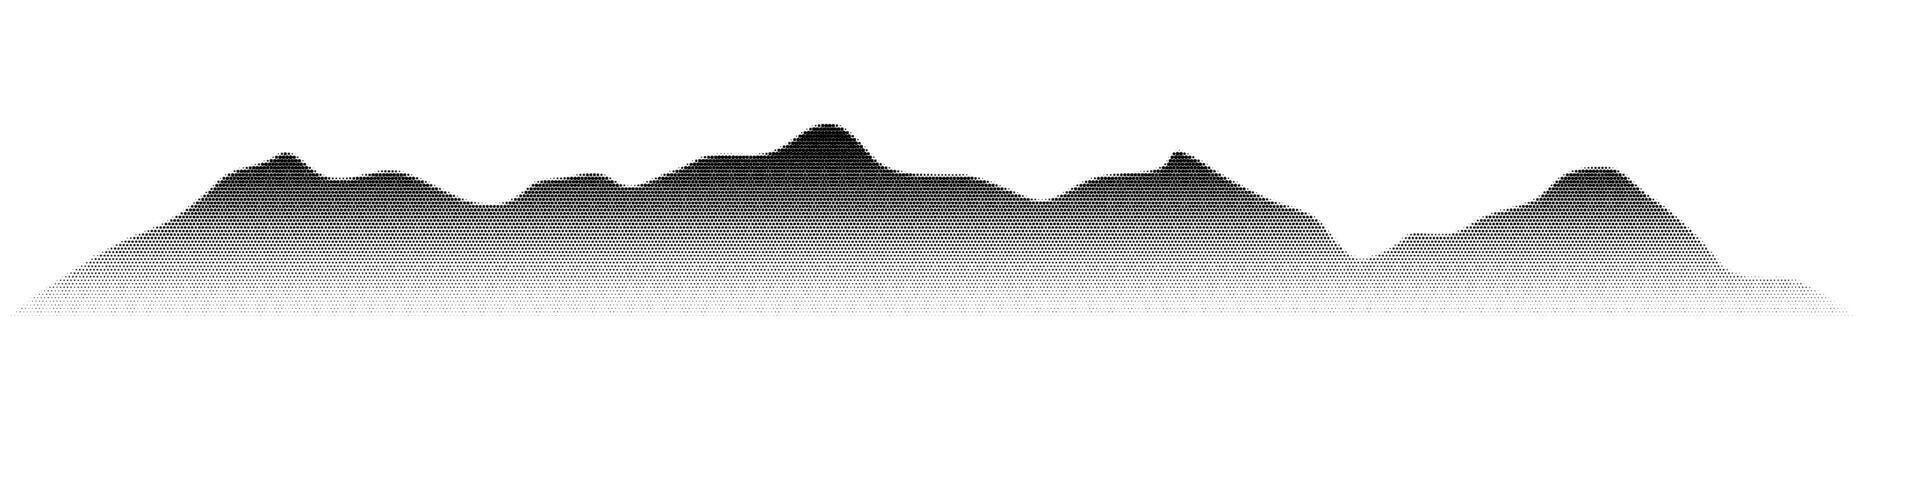 Abstract mountain landscape background with texture. Noise and grain dotwork dynamic aesthetic. Flat vector illustration isolated on white background.